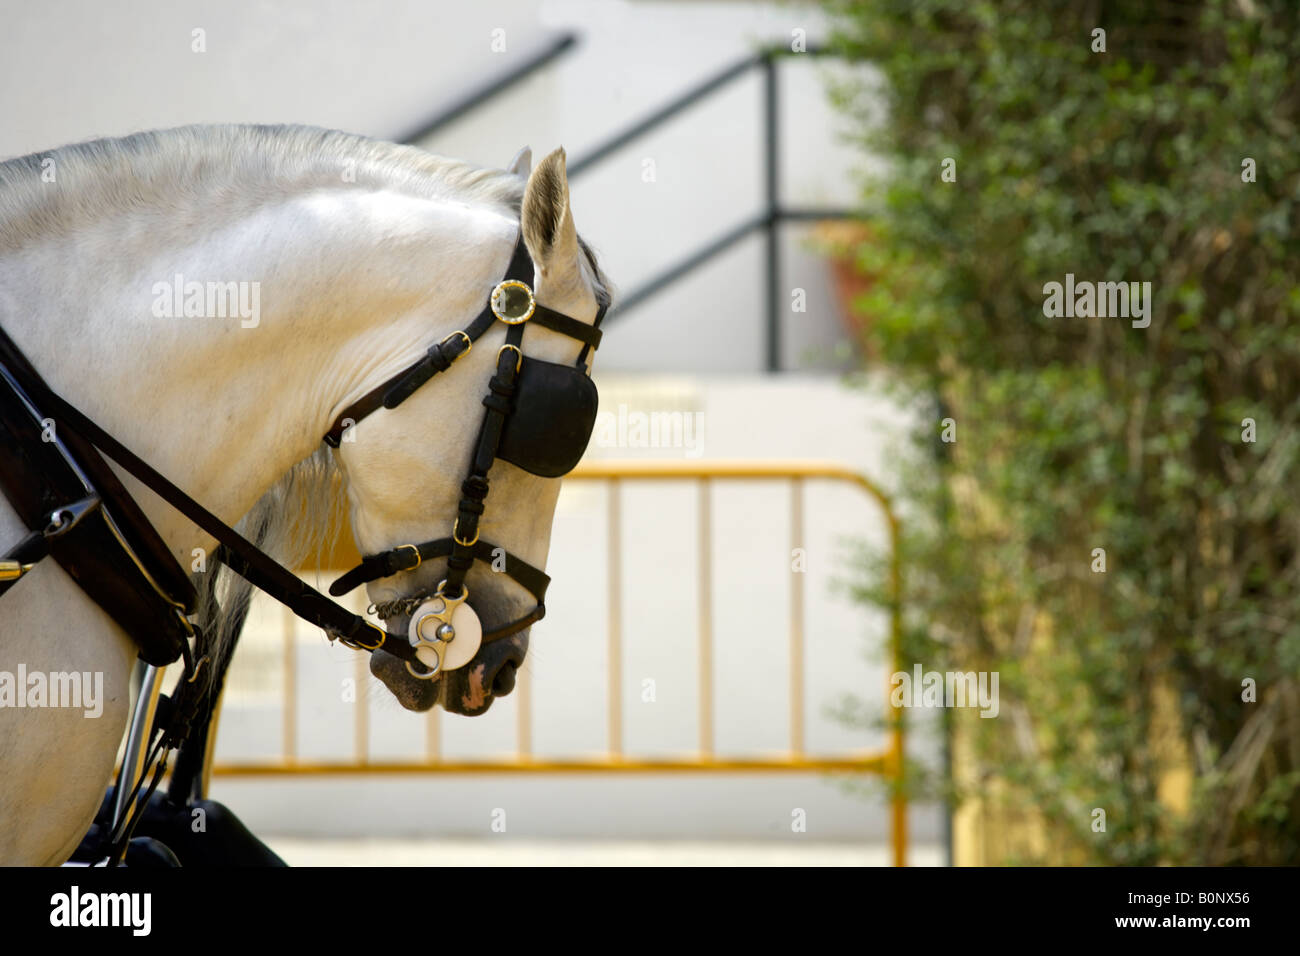 Head and neck of a white horse in harness Stock Photo